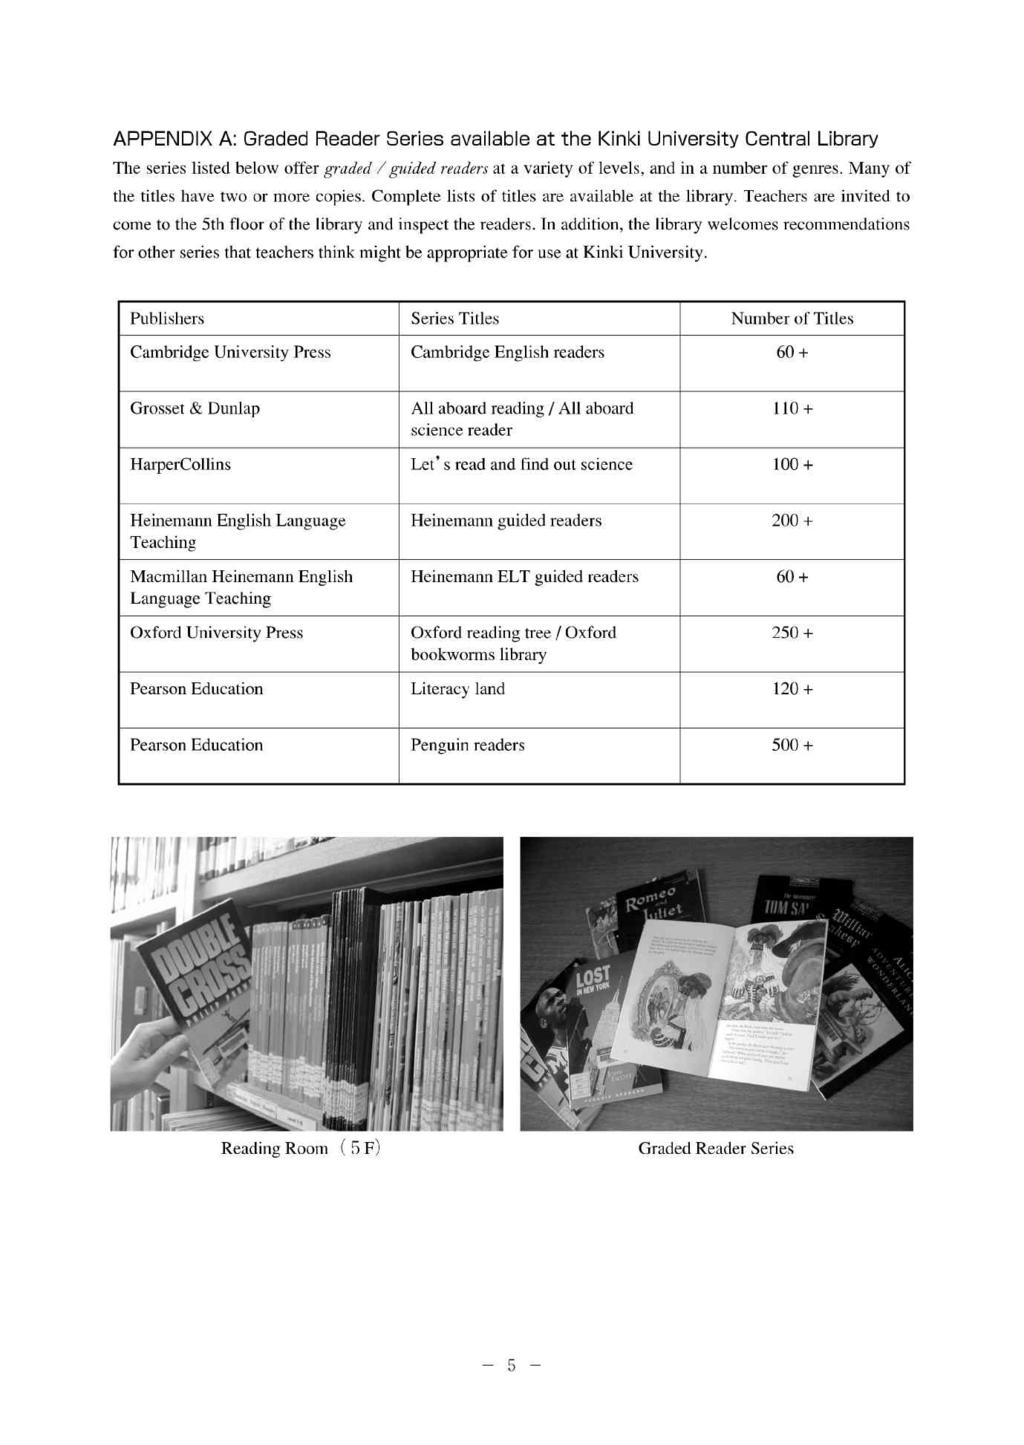 APPENDIX A: Graded Reader Series available at the Kinki University Central Library The series listed below offer graded / guided readers at a variety of levels, and in a number of genres.